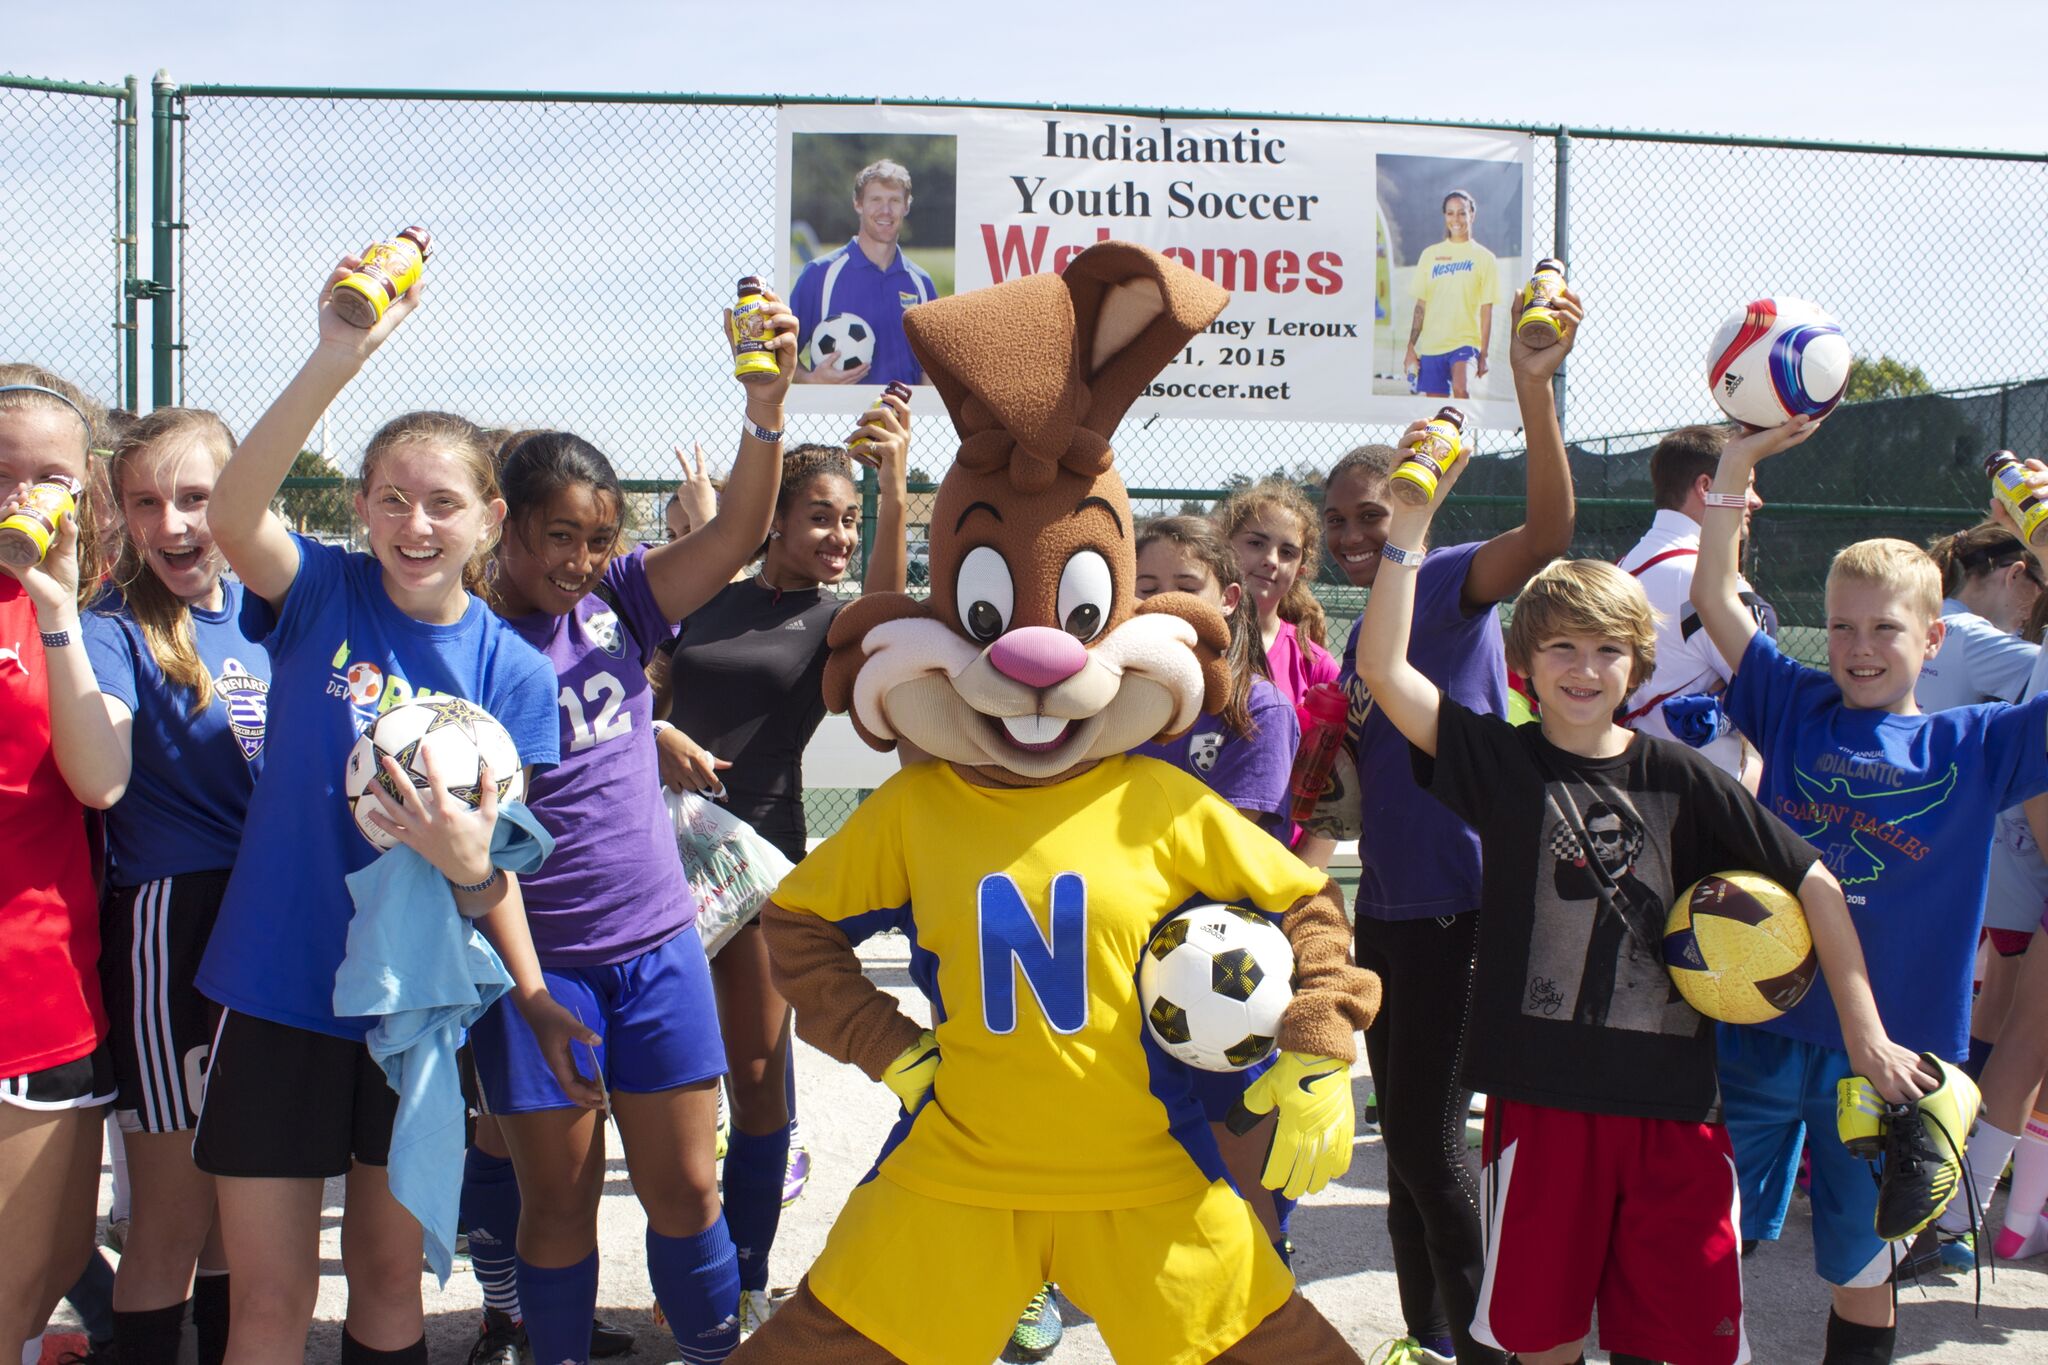 Nesquik Youth Soccer Marketing Campaign